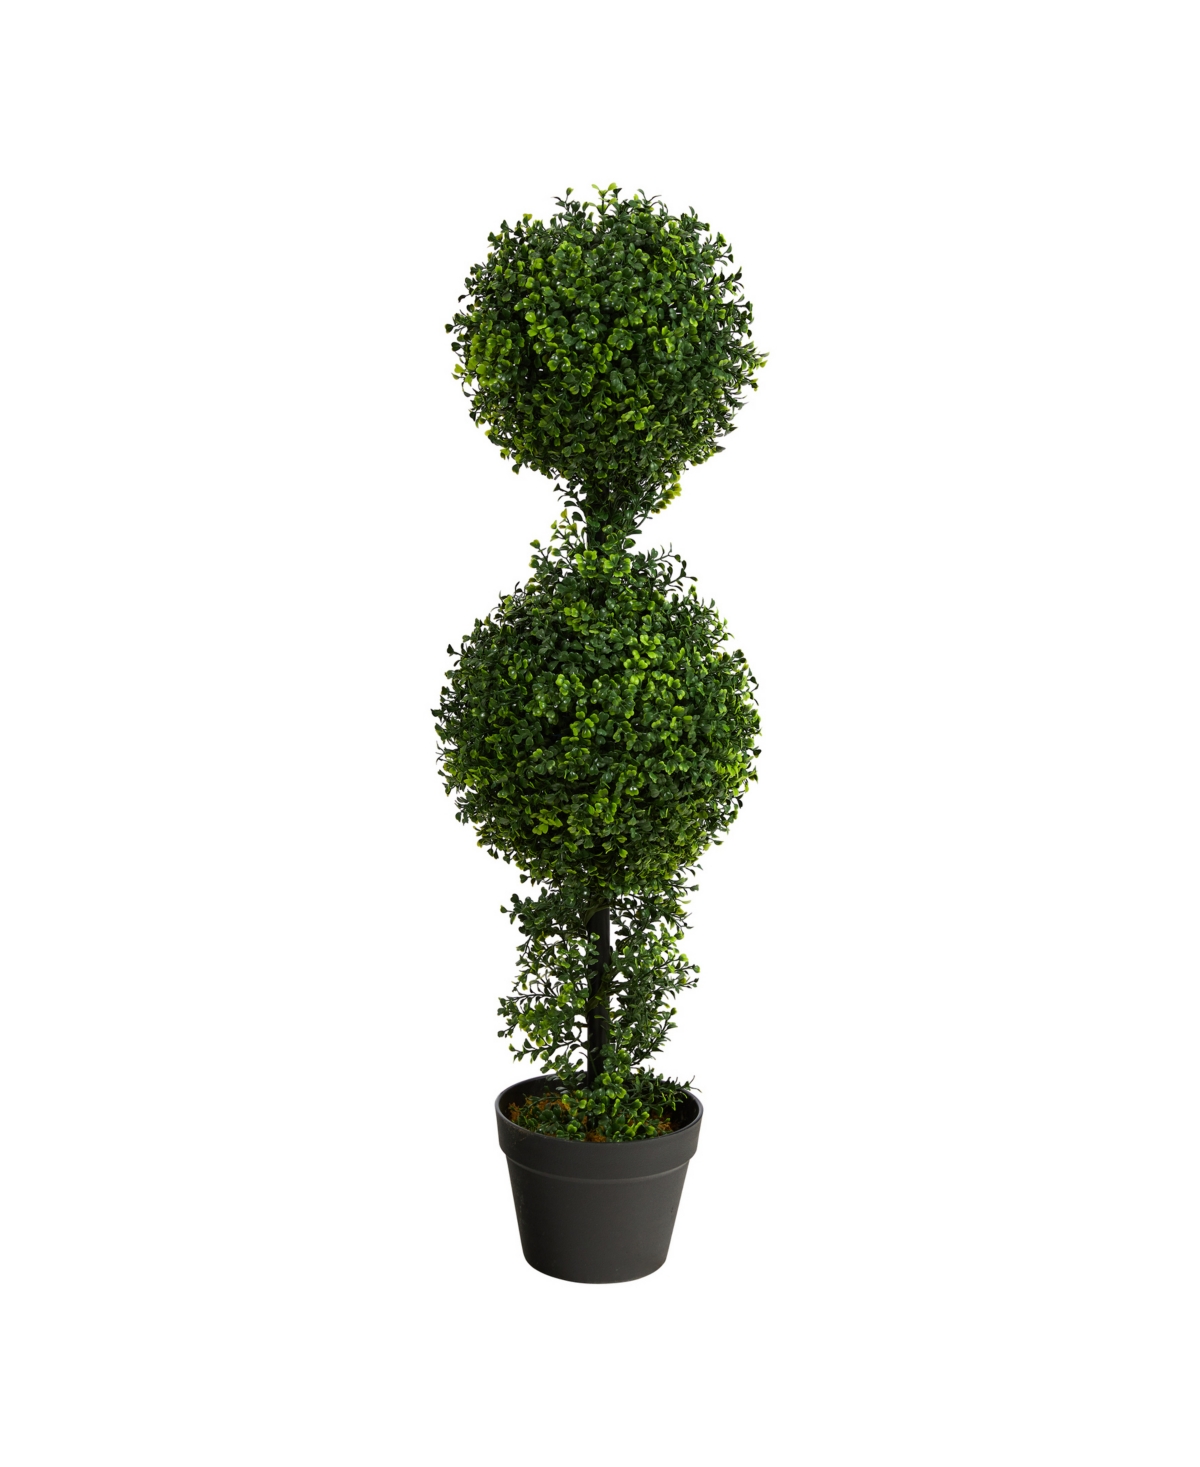 34" Boxwood Double Ball Topiary Artificial Tree Indoor/Outdoor - Green